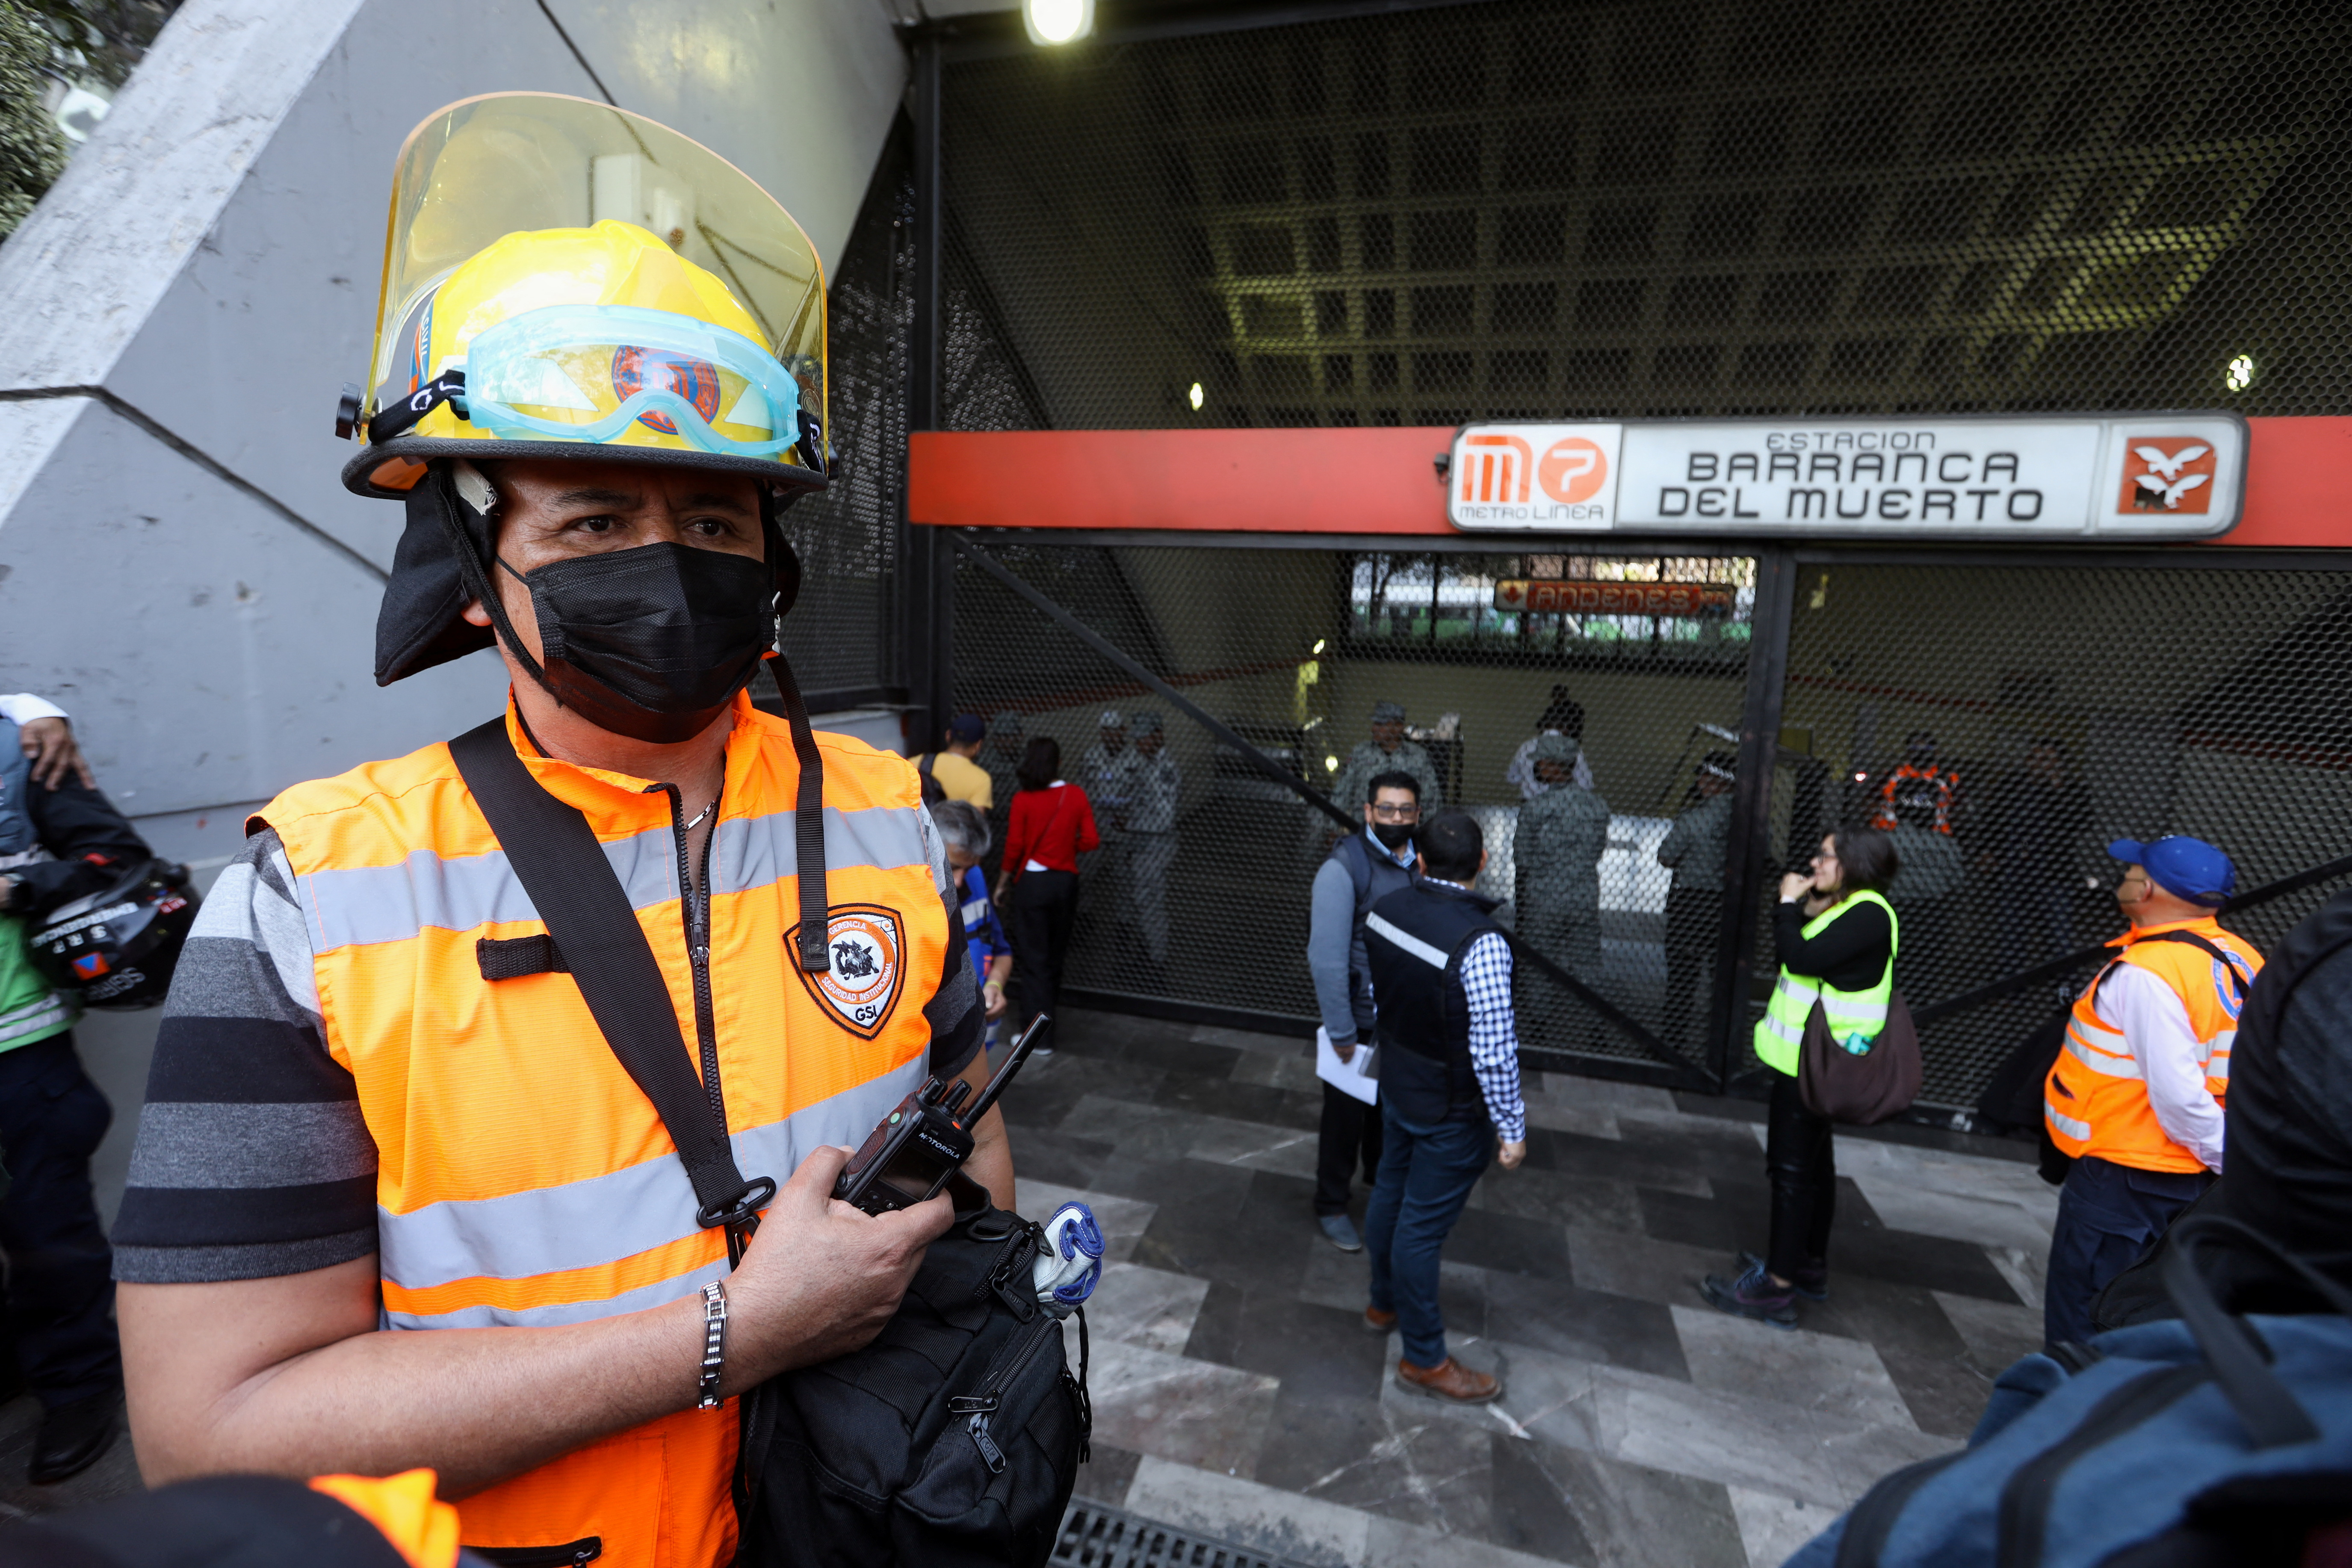 Firefighters and rescue personnel attend an emergency following a fire caused by a short circuit at the Barranca del Muerto metro station, in Mexico City, Mexico January 23, 2023. REUTERS/Luis Cortes